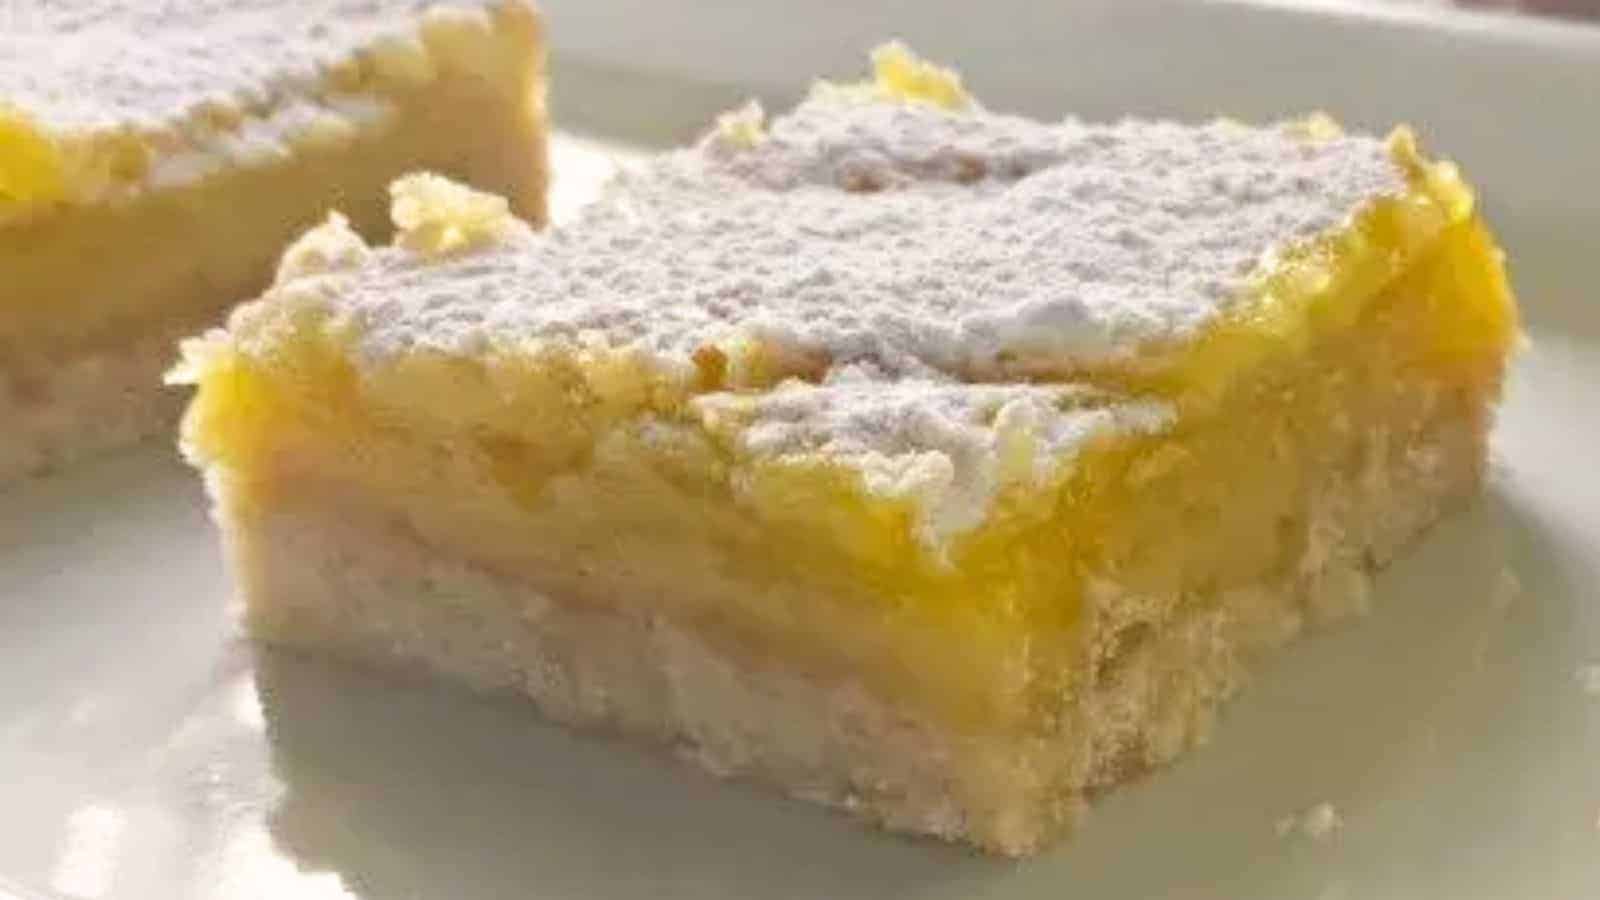 Image shows a close up of Lemon Squares on a white plate.